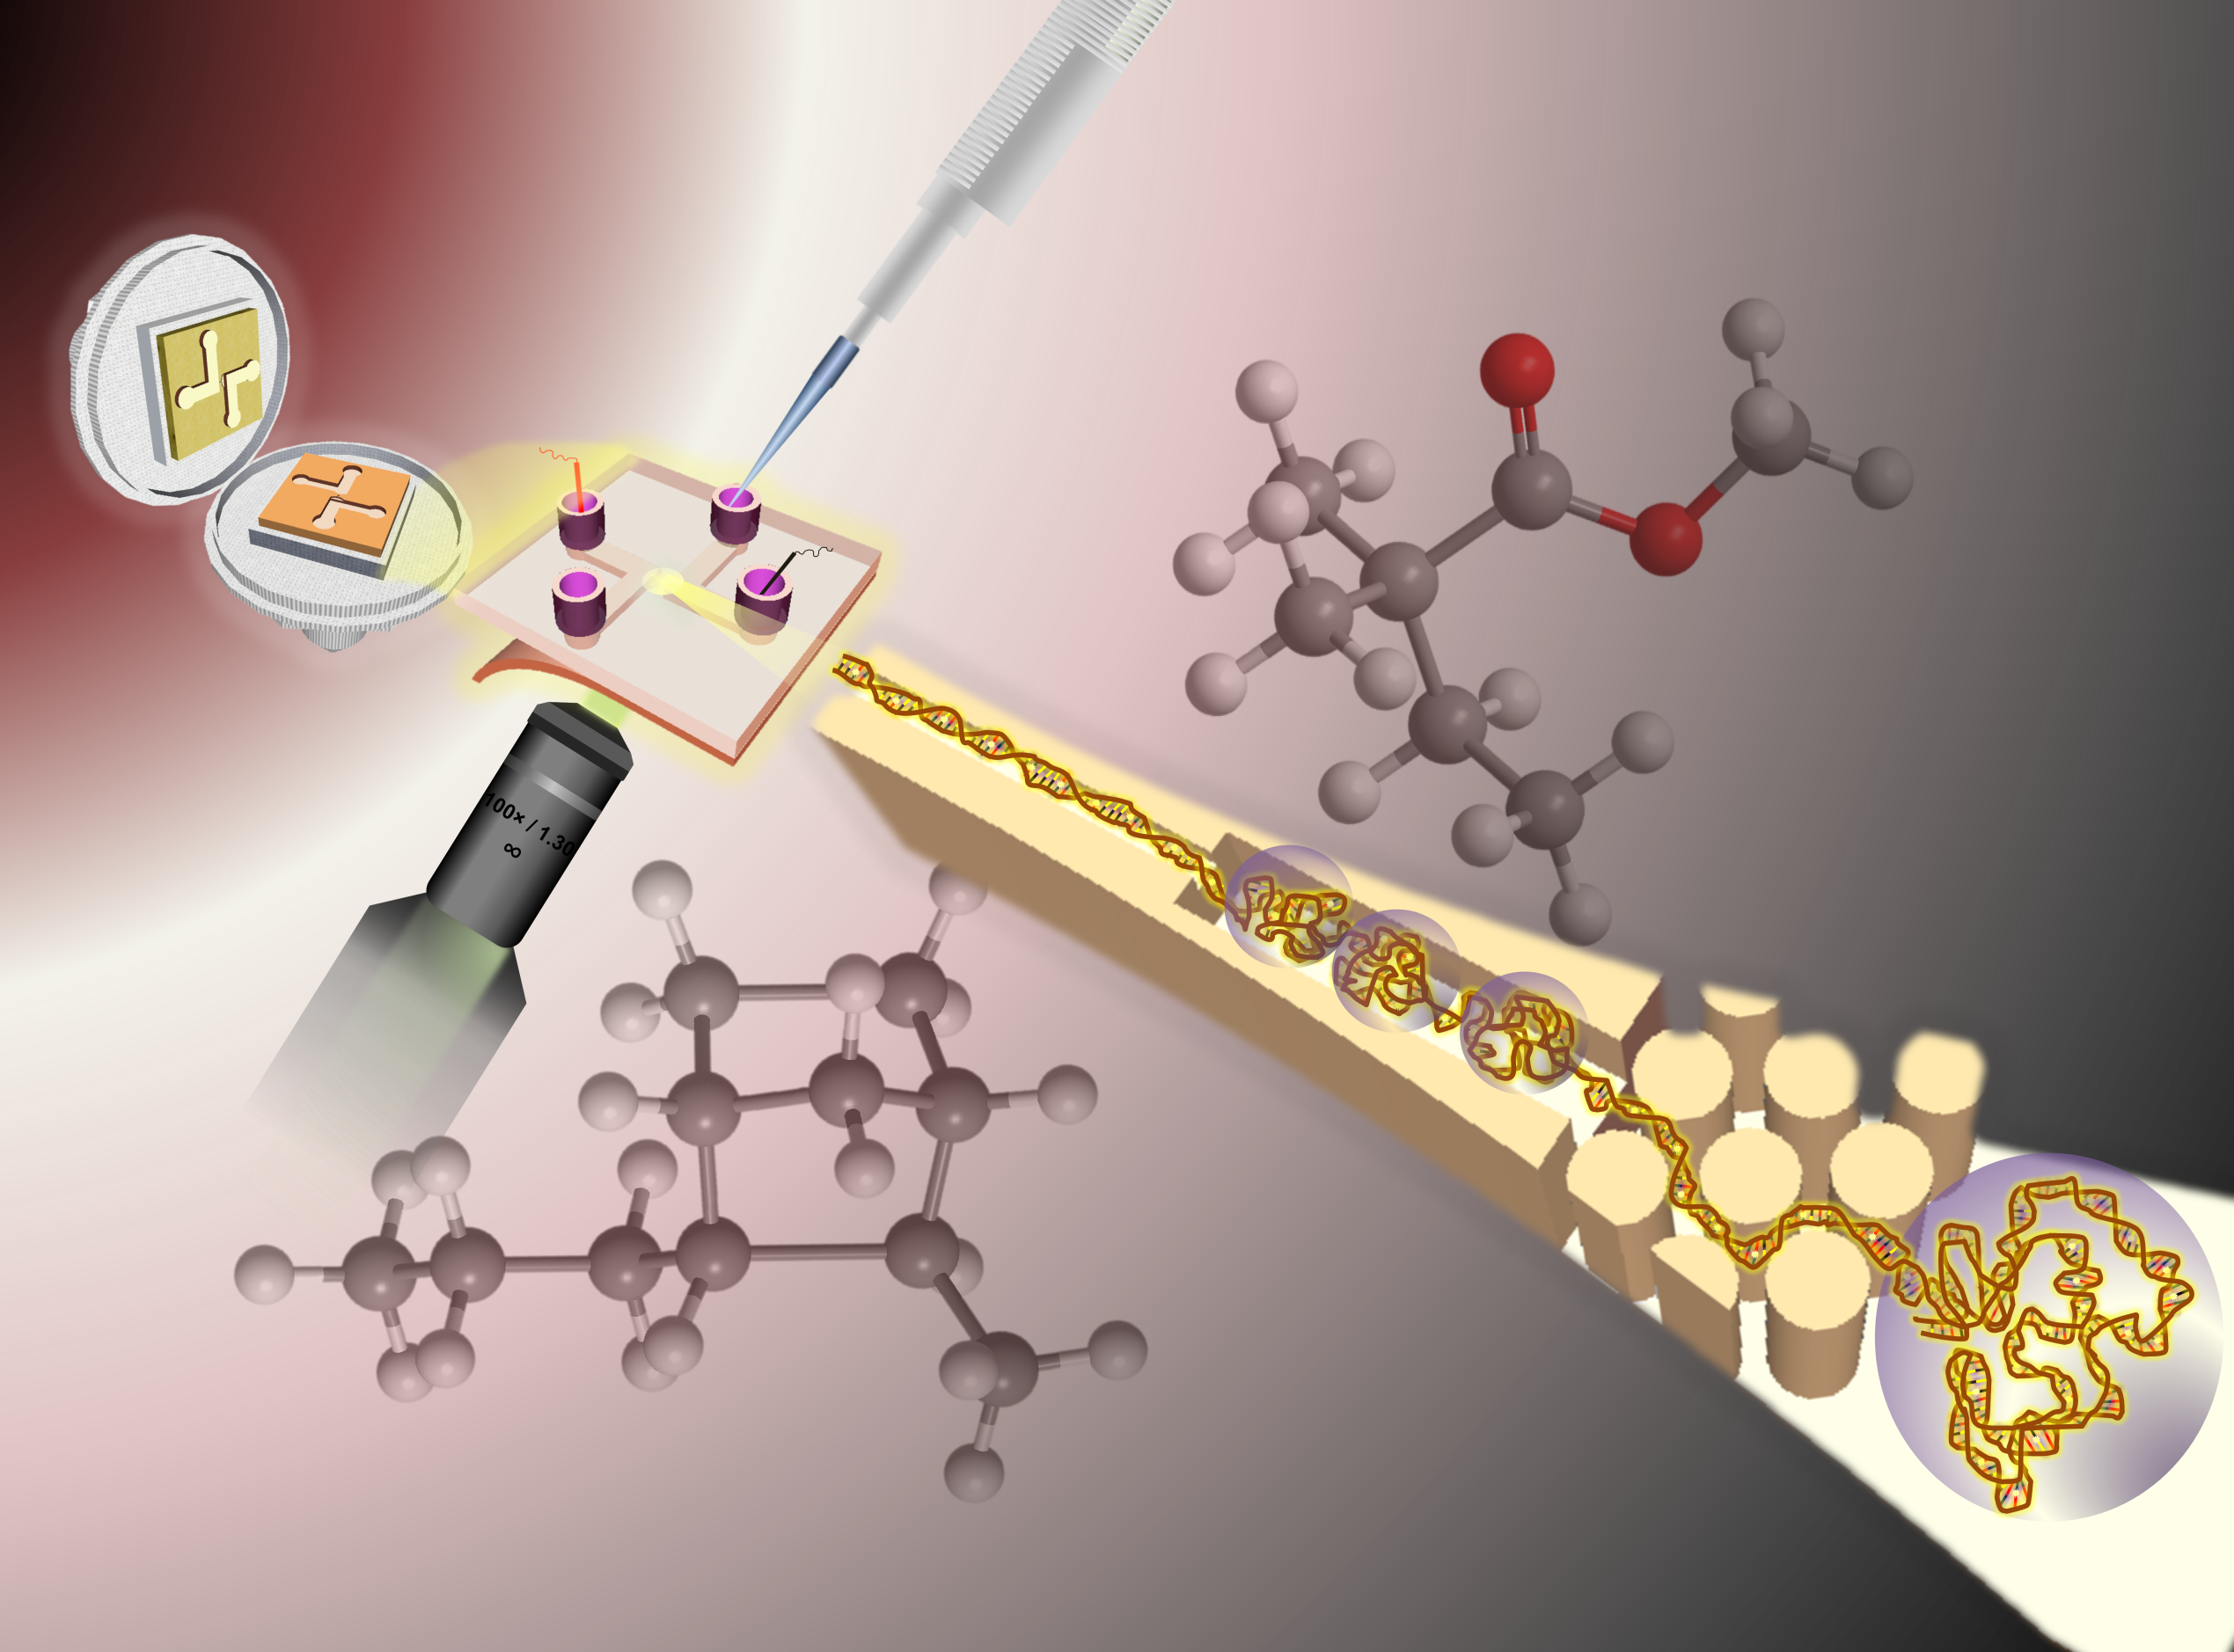 Illustration of a pipette tip with molecular interactions and a zoomed-in chip device on a gradient background